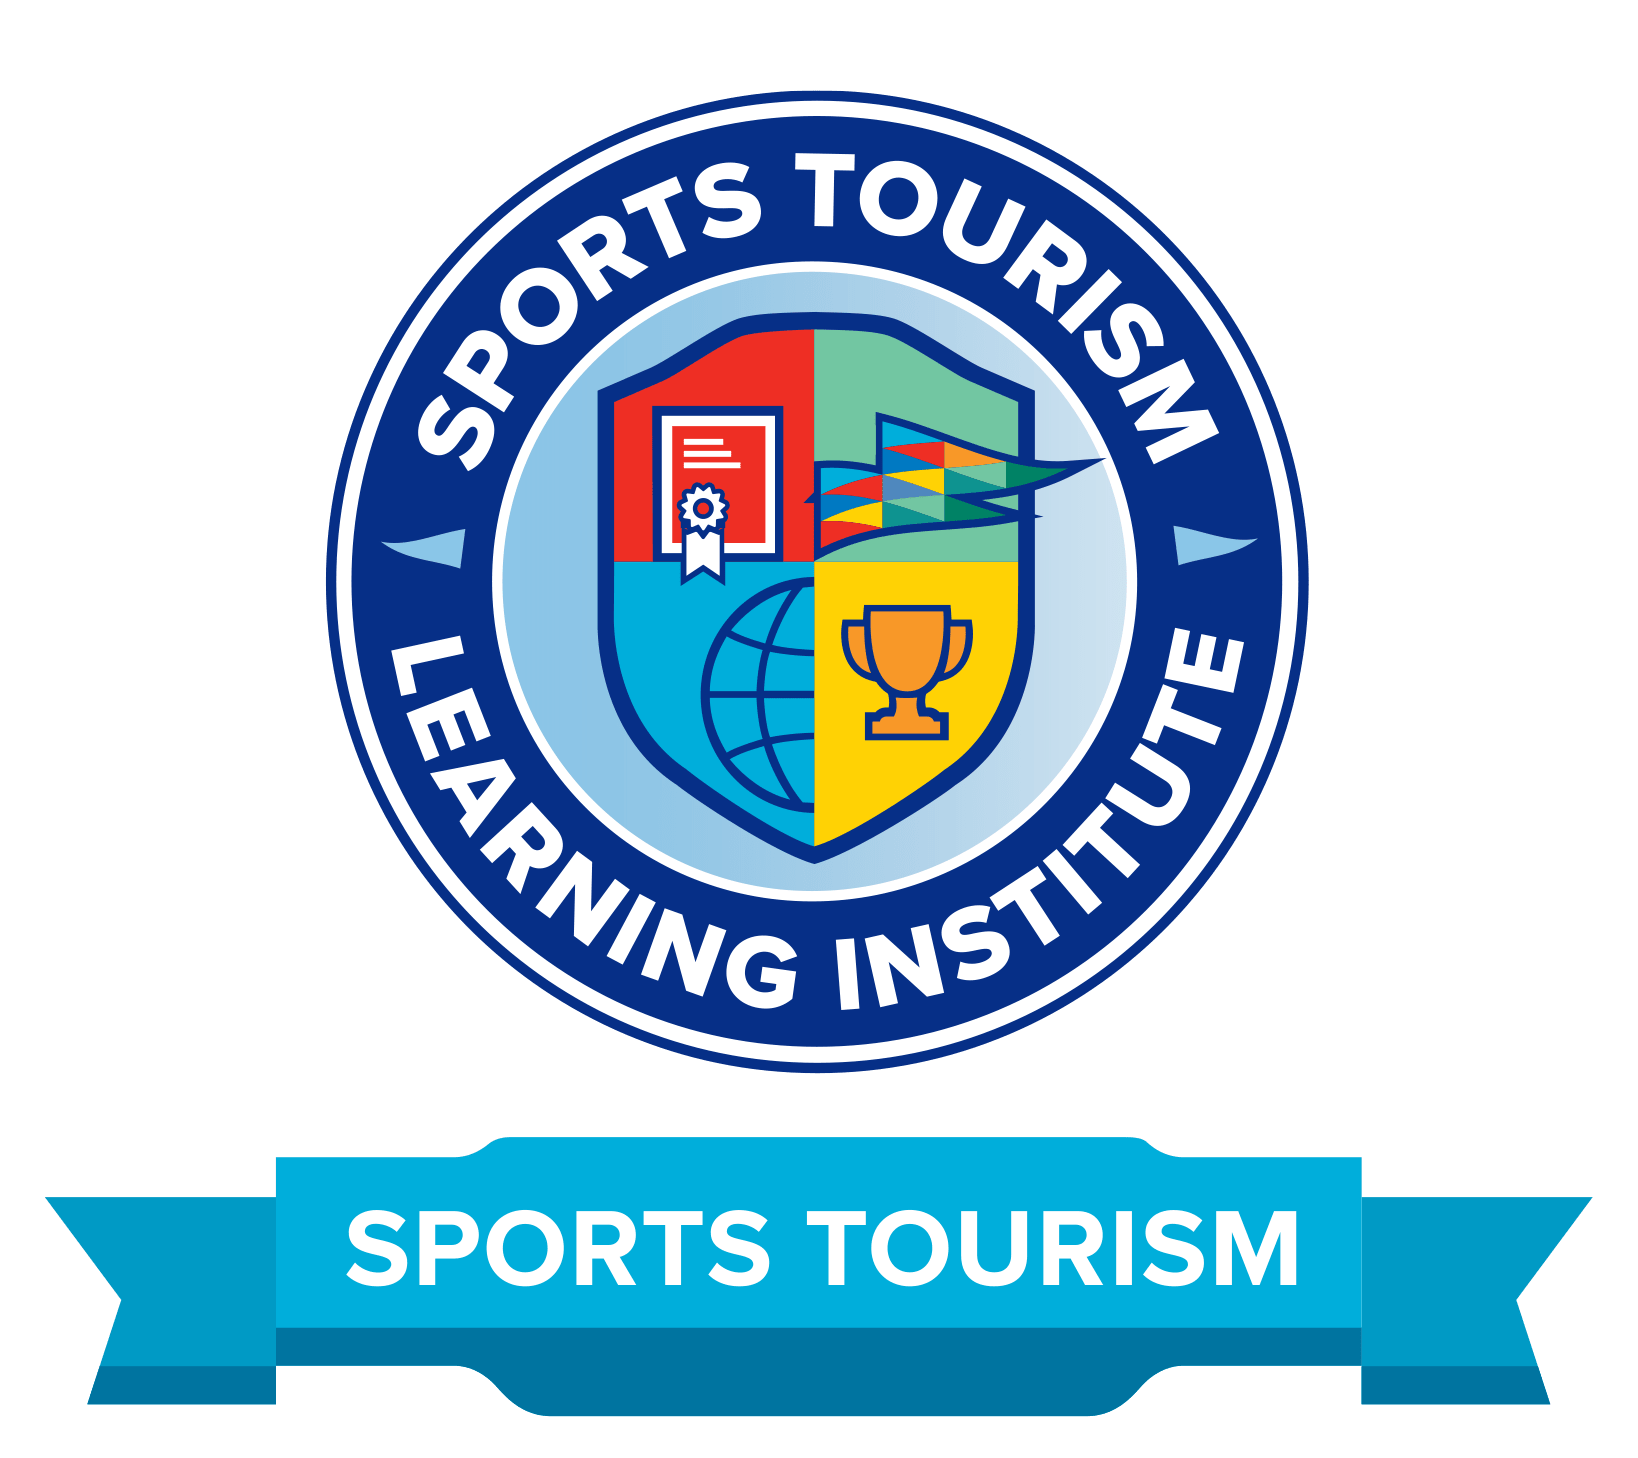 sports tourism participants policy and providers